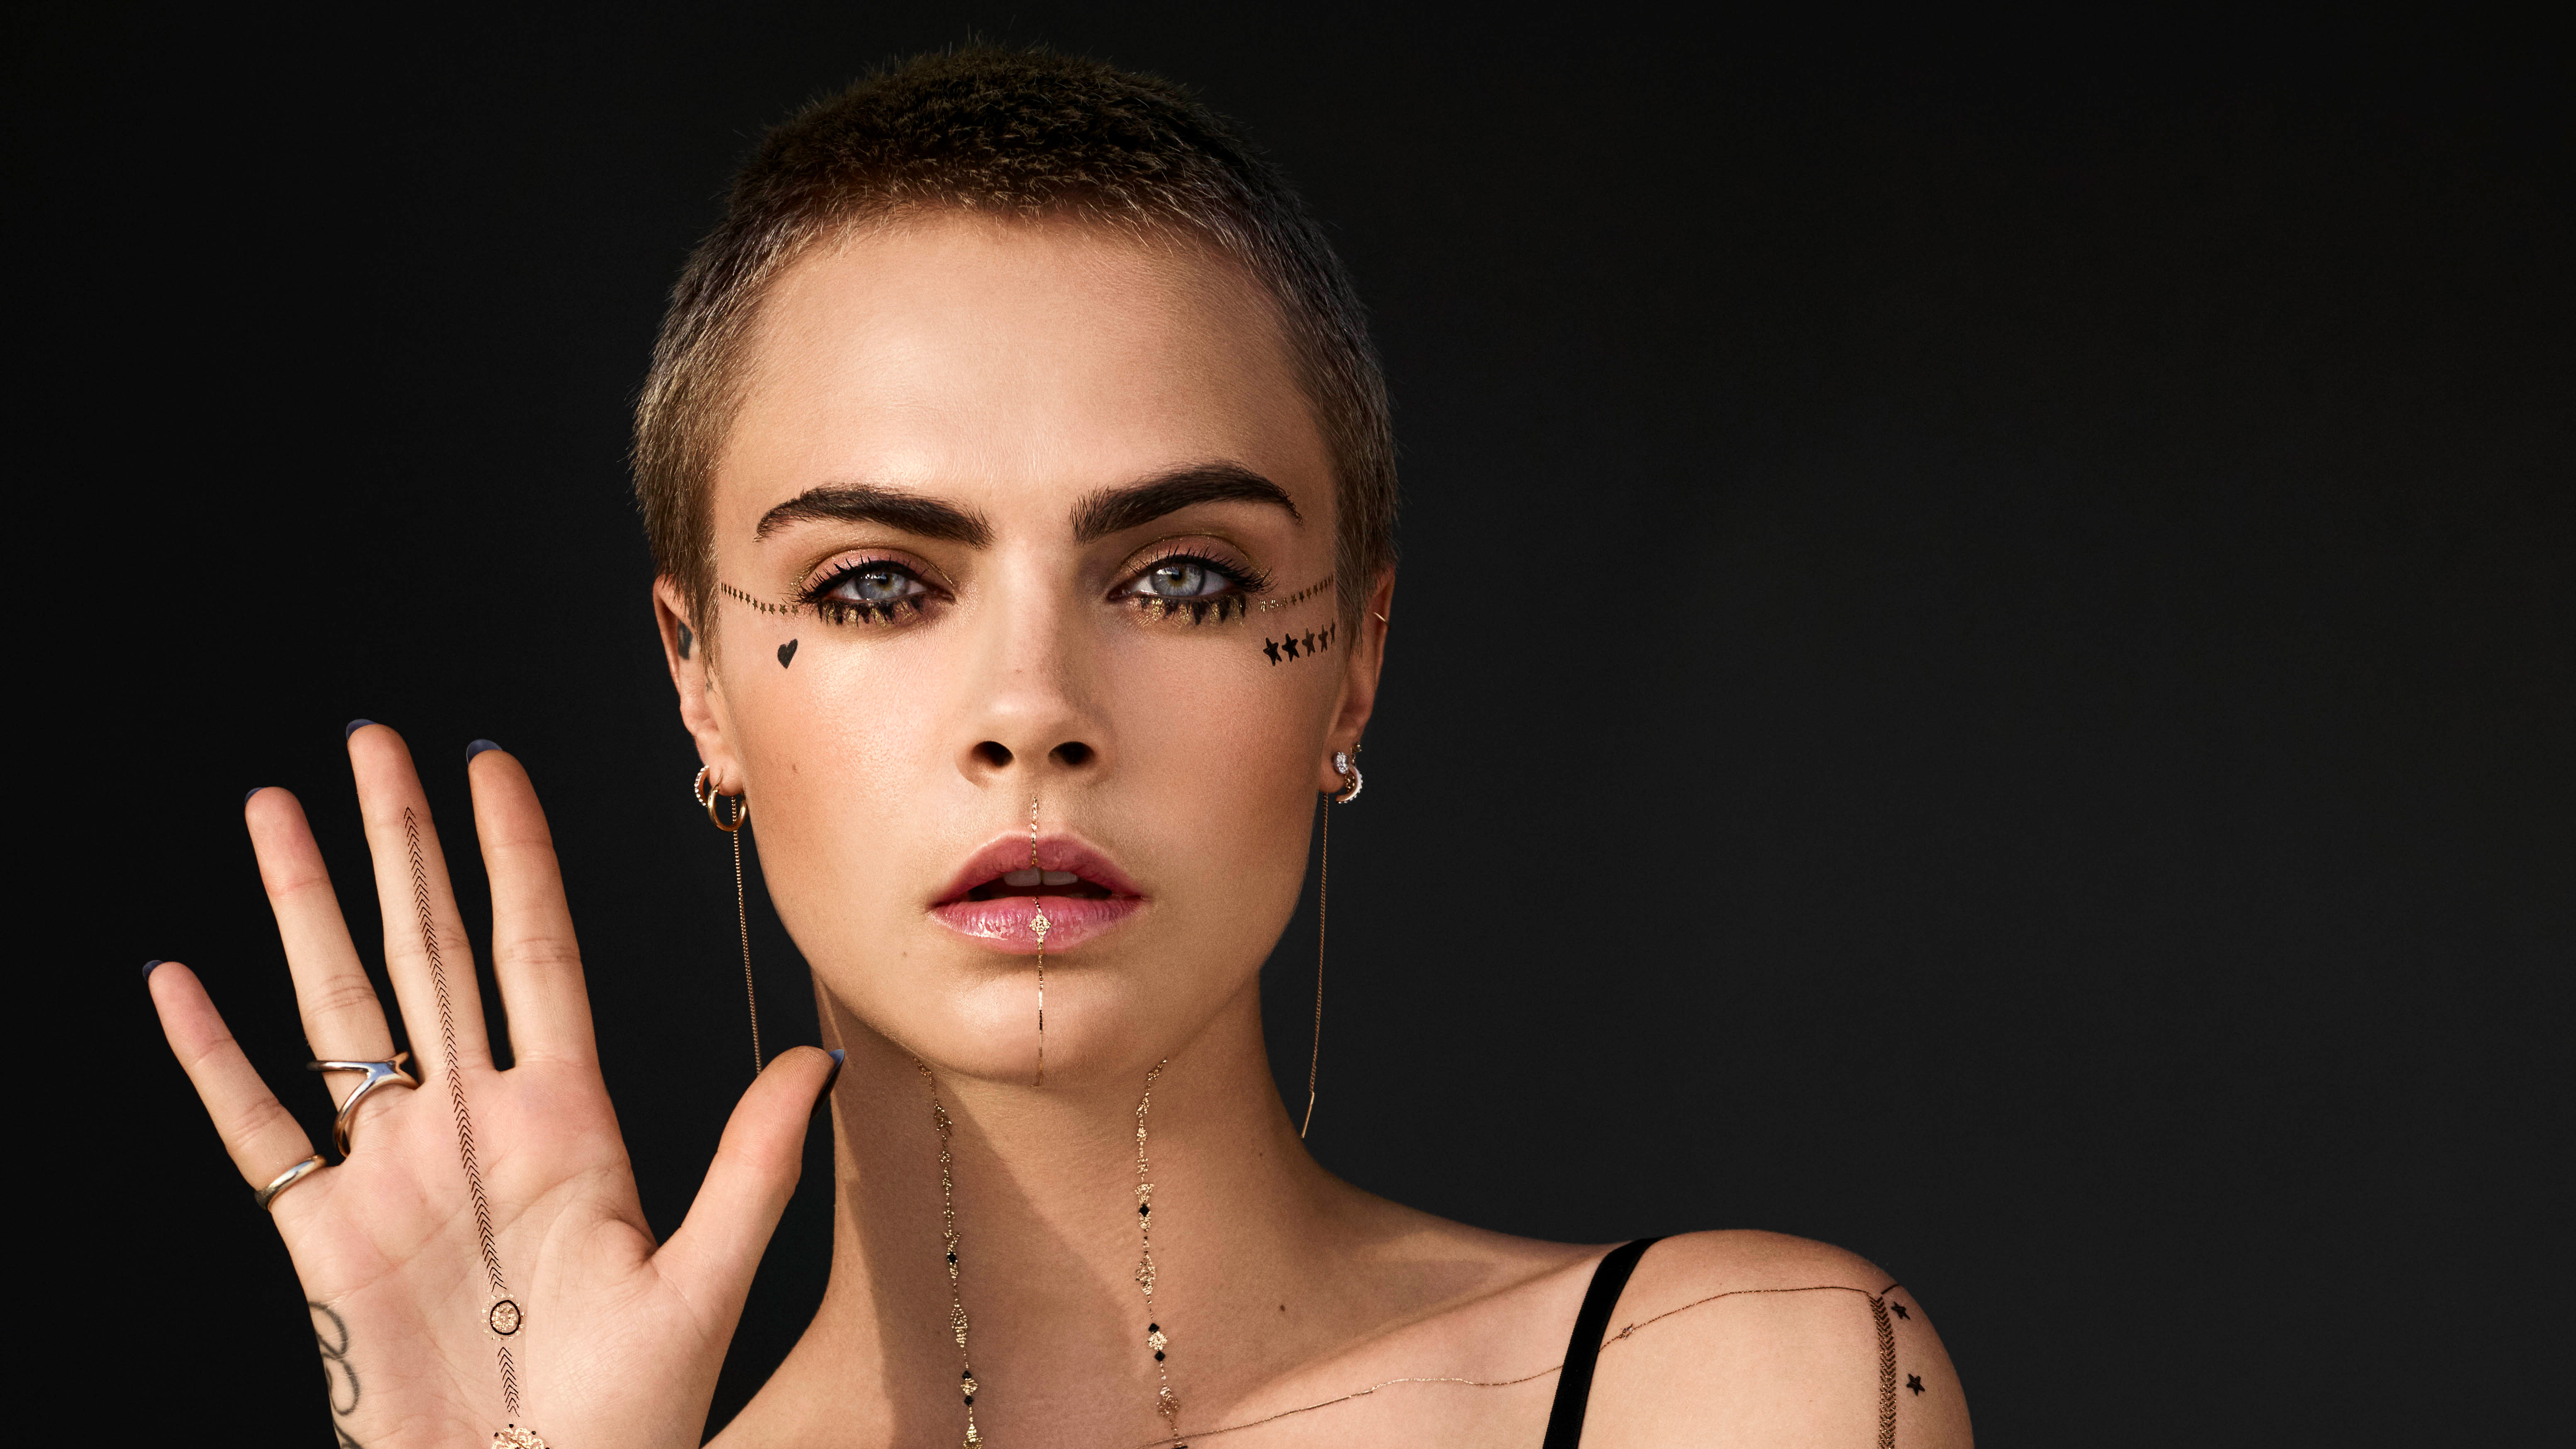 5k Cara Delevingne 2018 Hd Celebrities 4k Wallpapers Images Backgrounds Photos And Pictures 9676